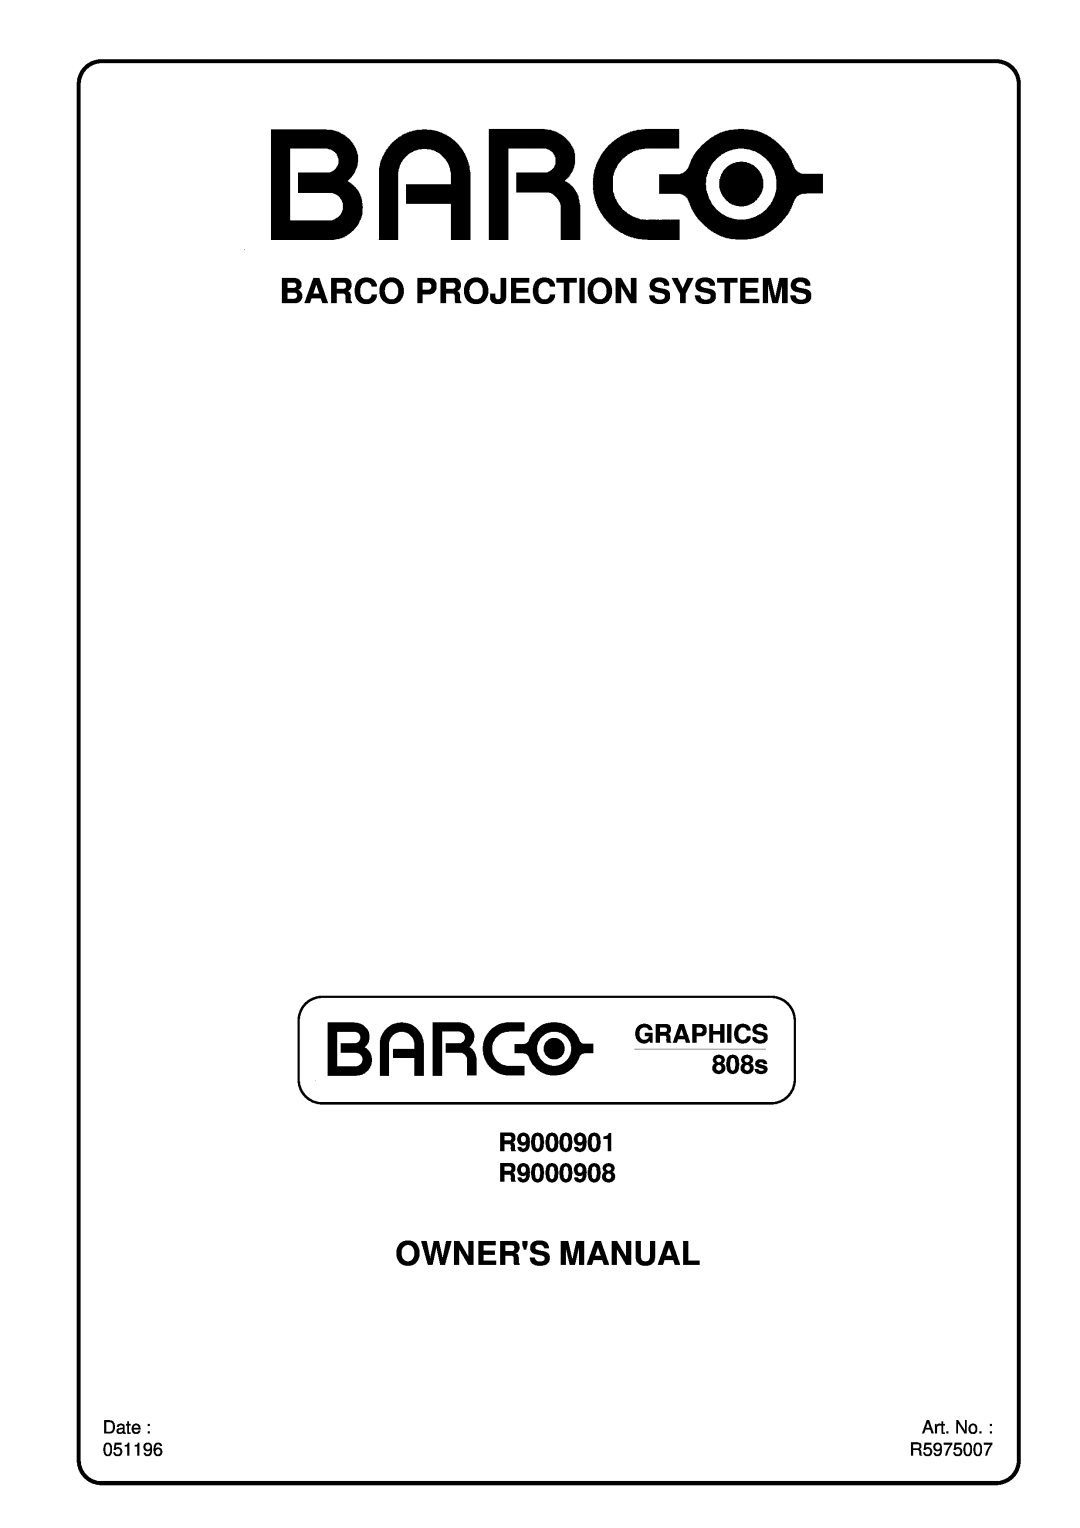 Barco Date, Art. No, 051196, R5975007, Barco Projection Systems, Owners Manual, GRAPHICS 808s R9000901 R9000908 